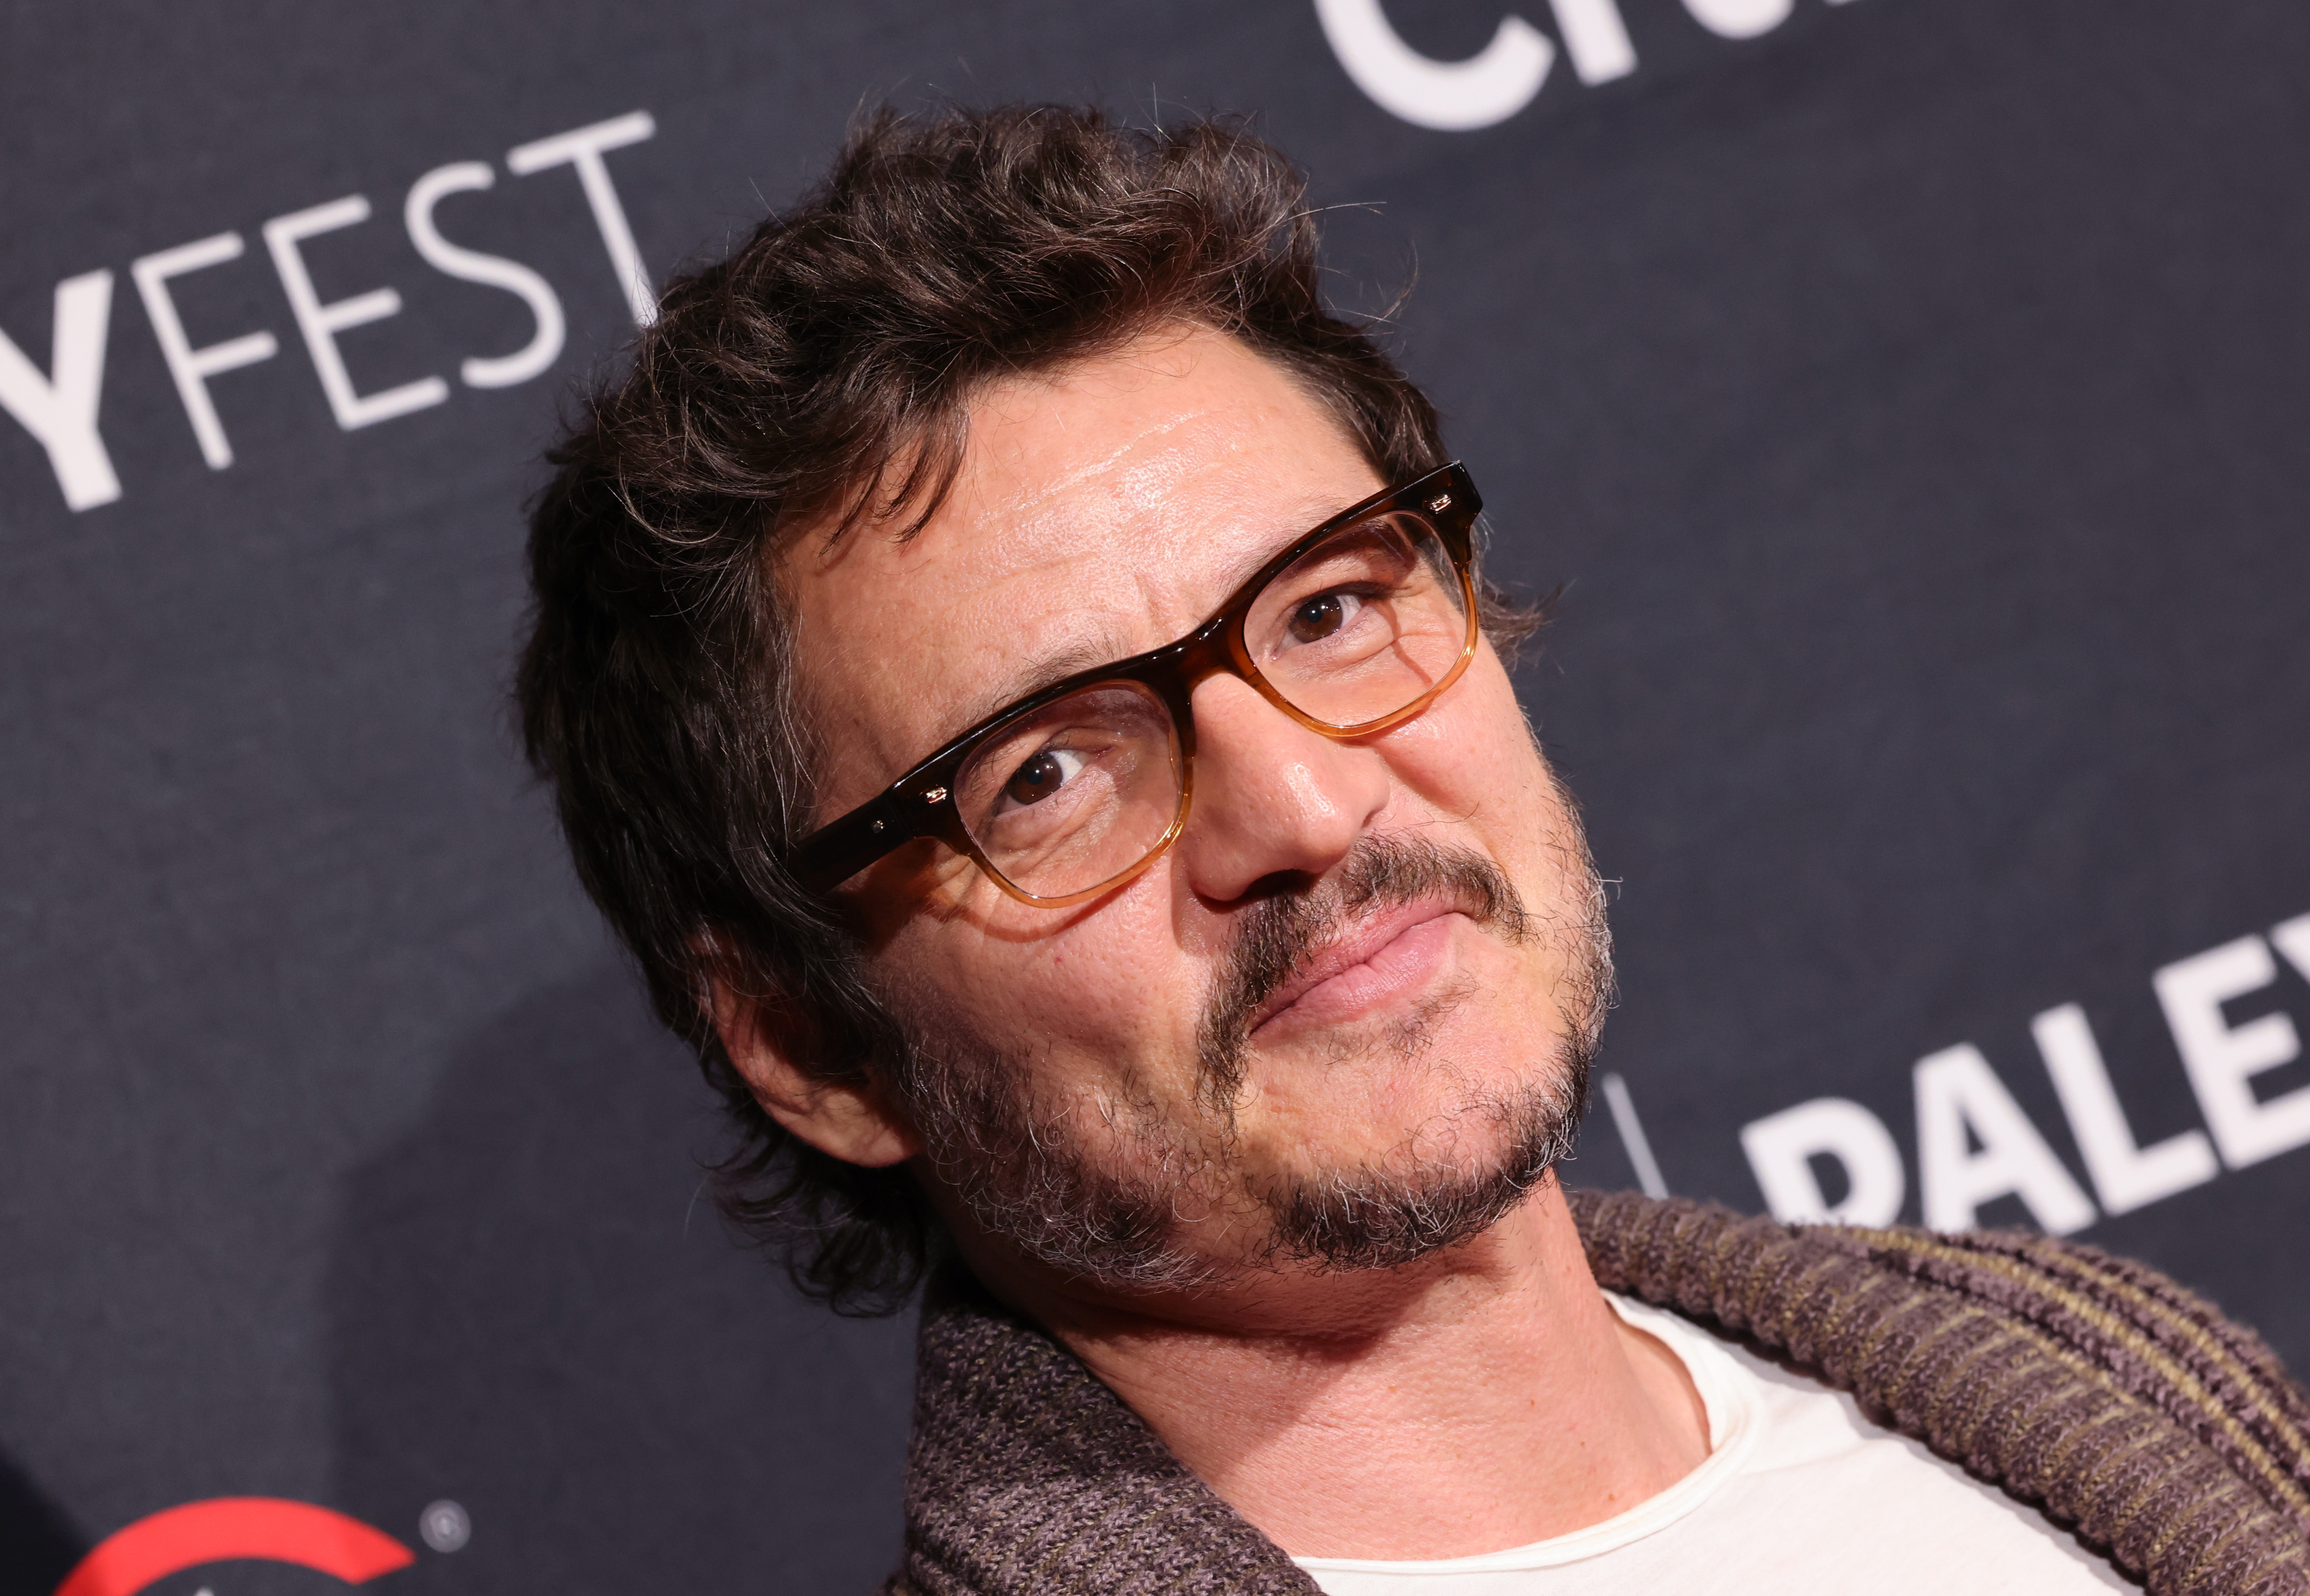 The Last of Us' Fans Will Be Shattered Over Pedro Pascal's